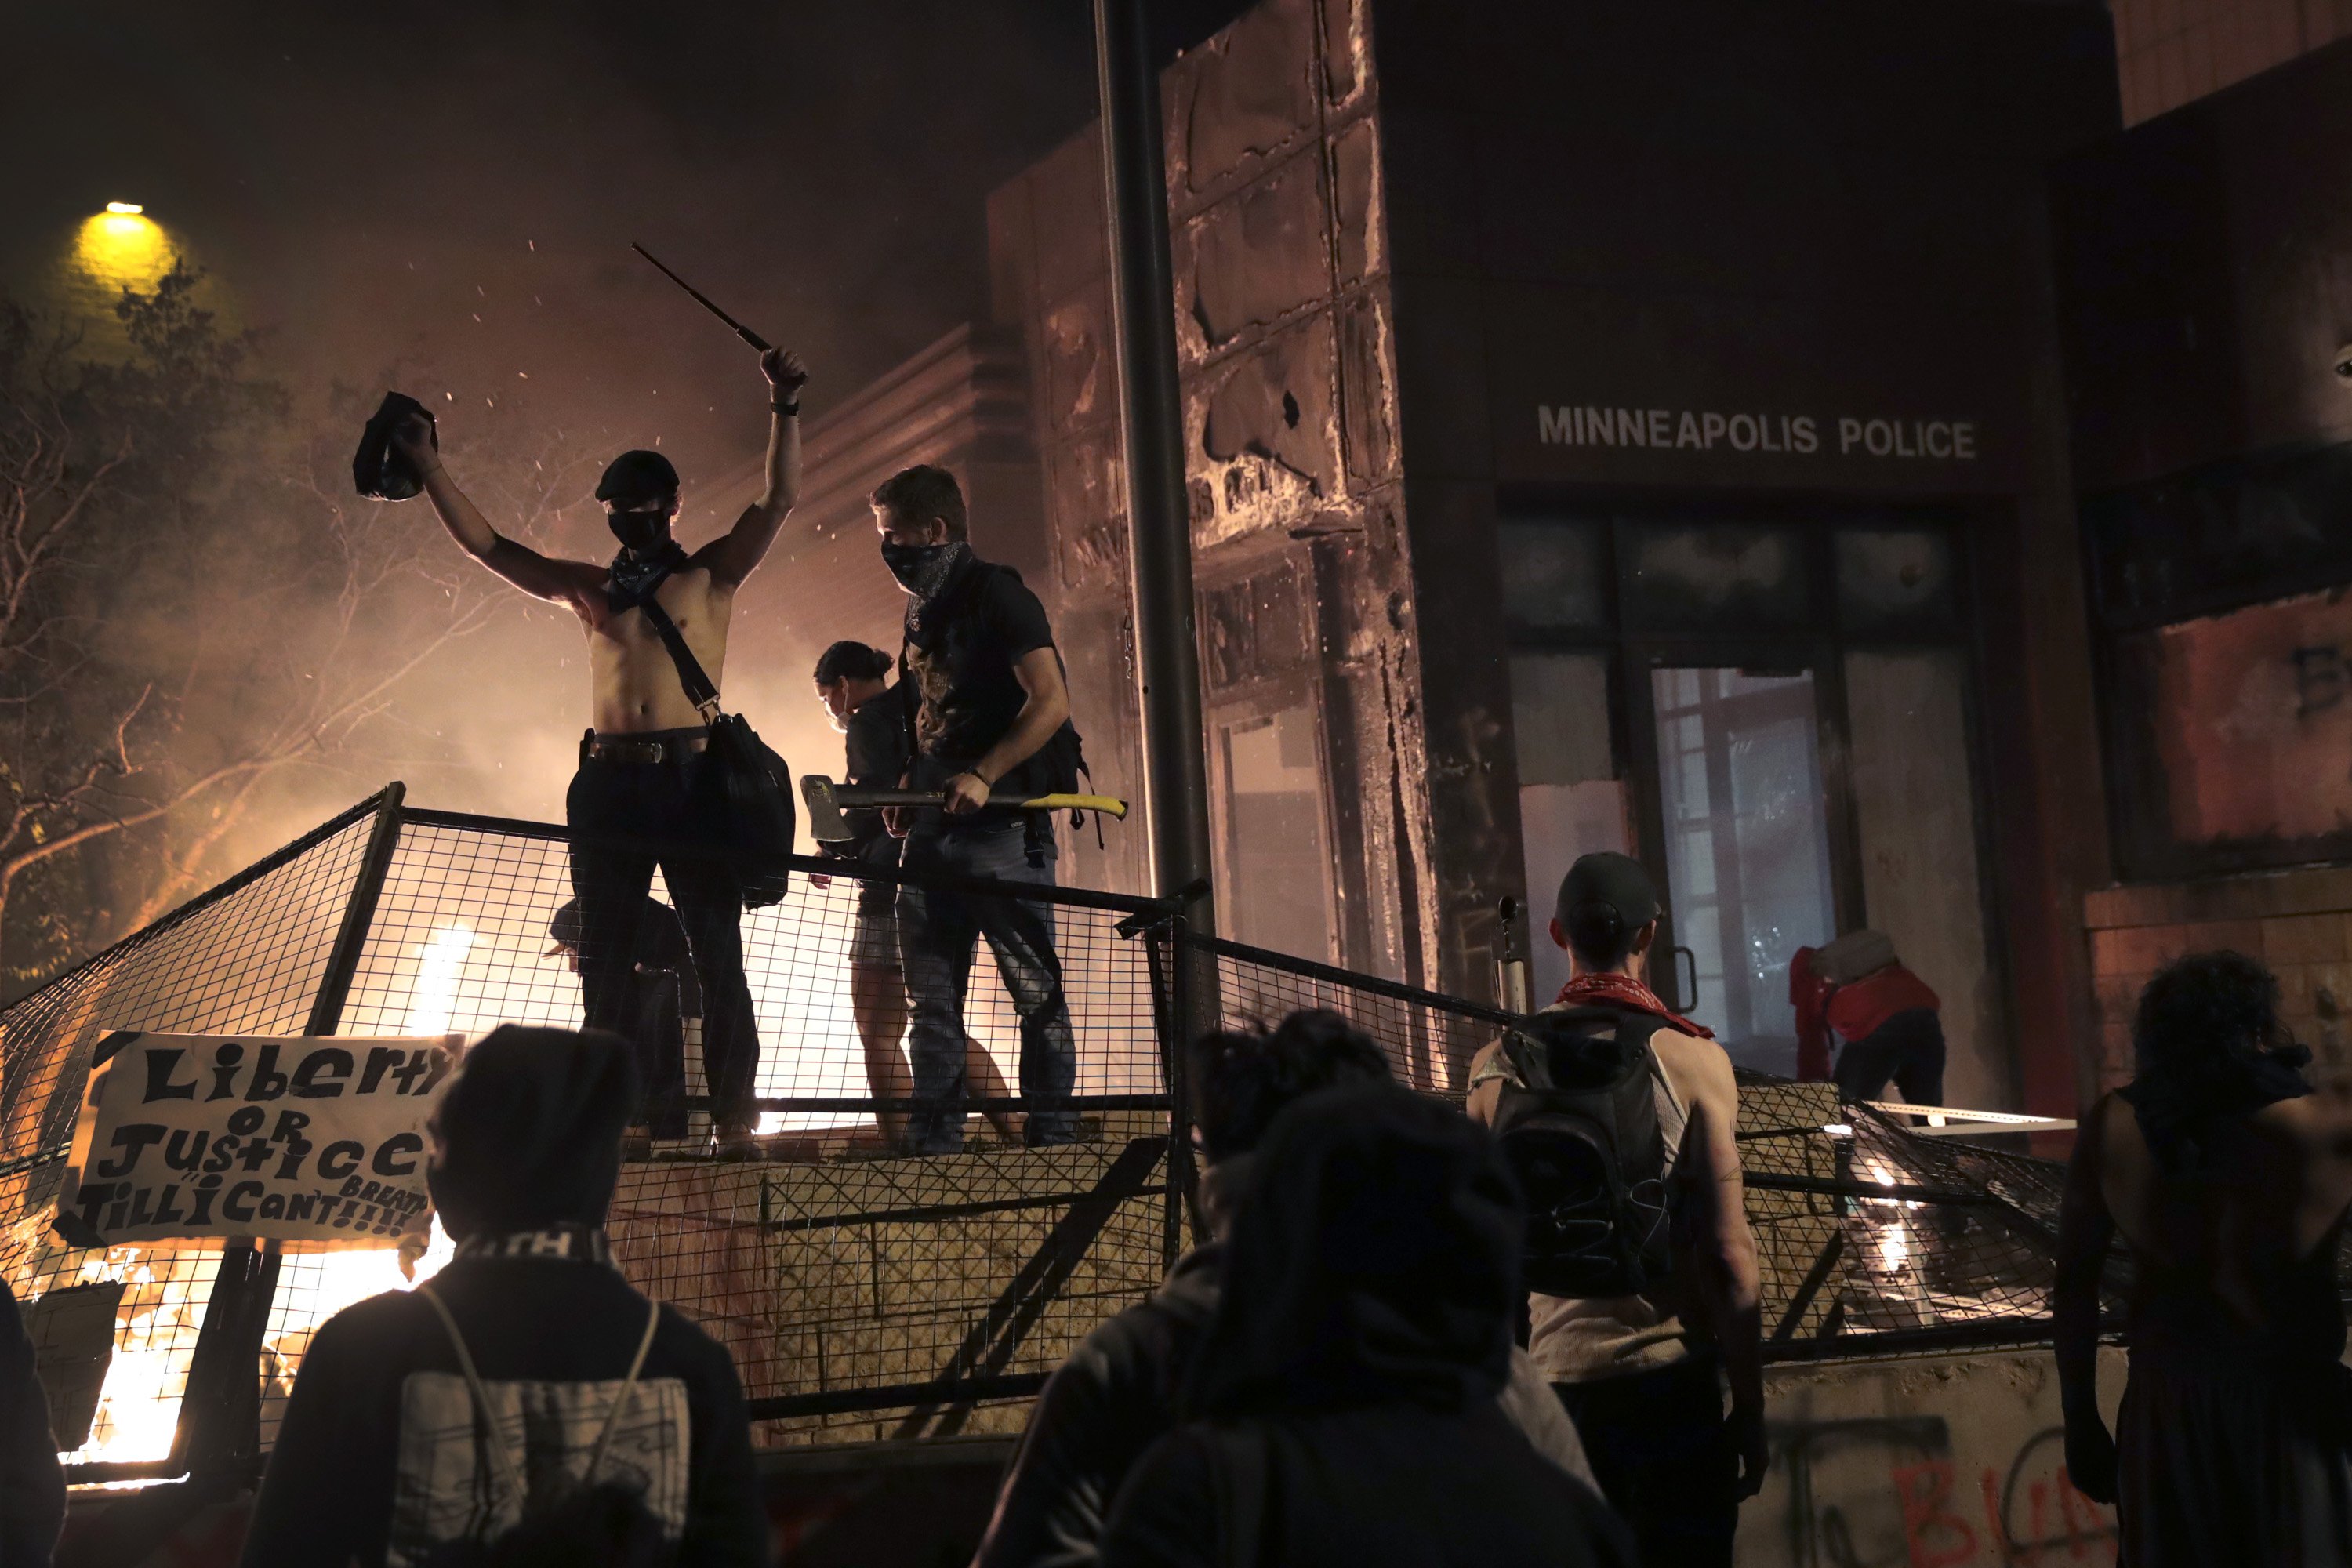 The Minneapolis Police Department 3rd precinct building burns on May 28, 2020. (Photo: Scott Olson/Getty Images)